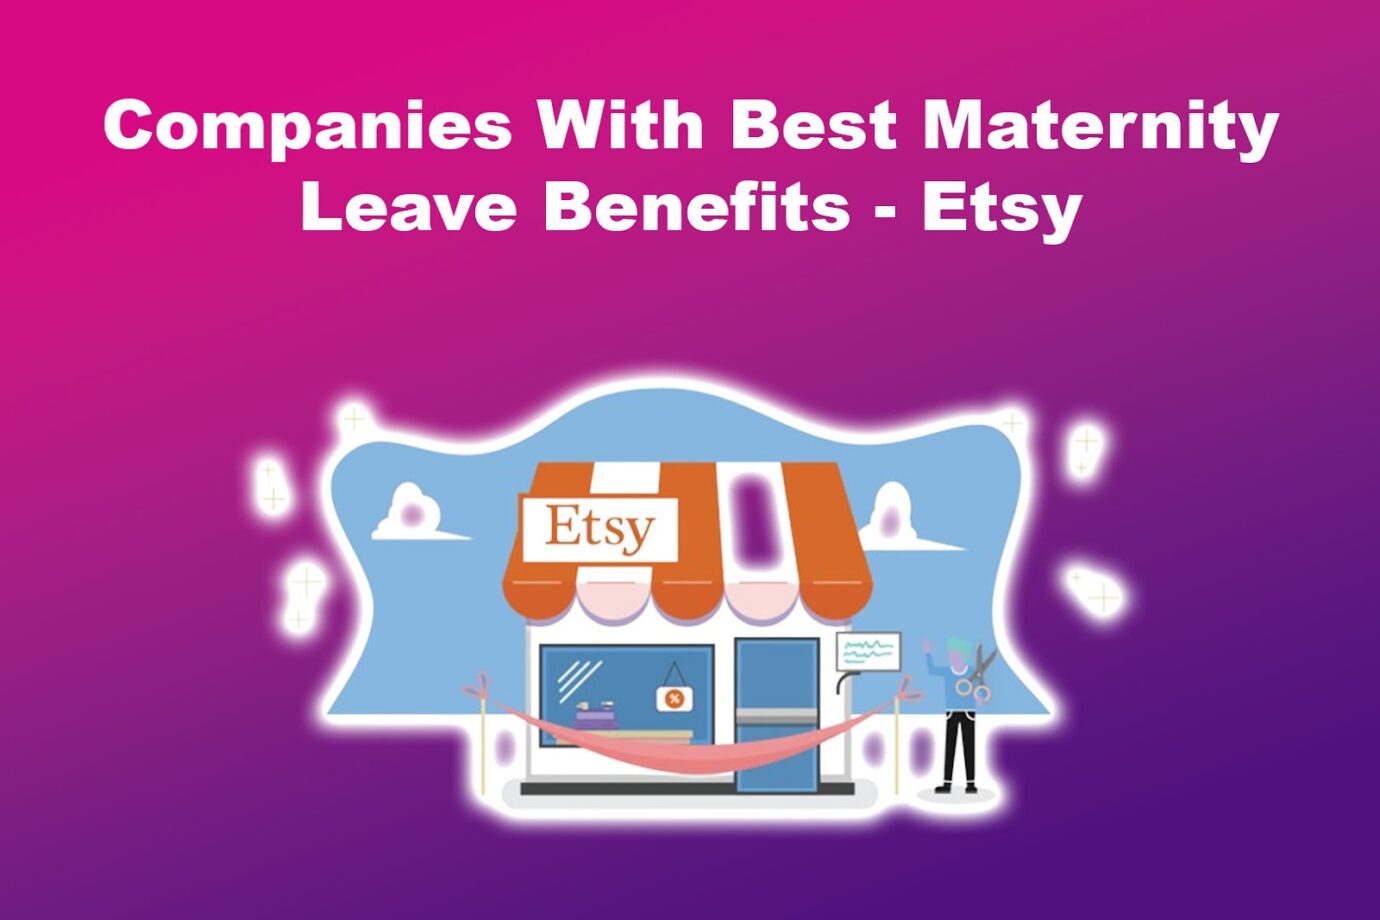 Companies With Best Maternity Leave Benefits - Amazon